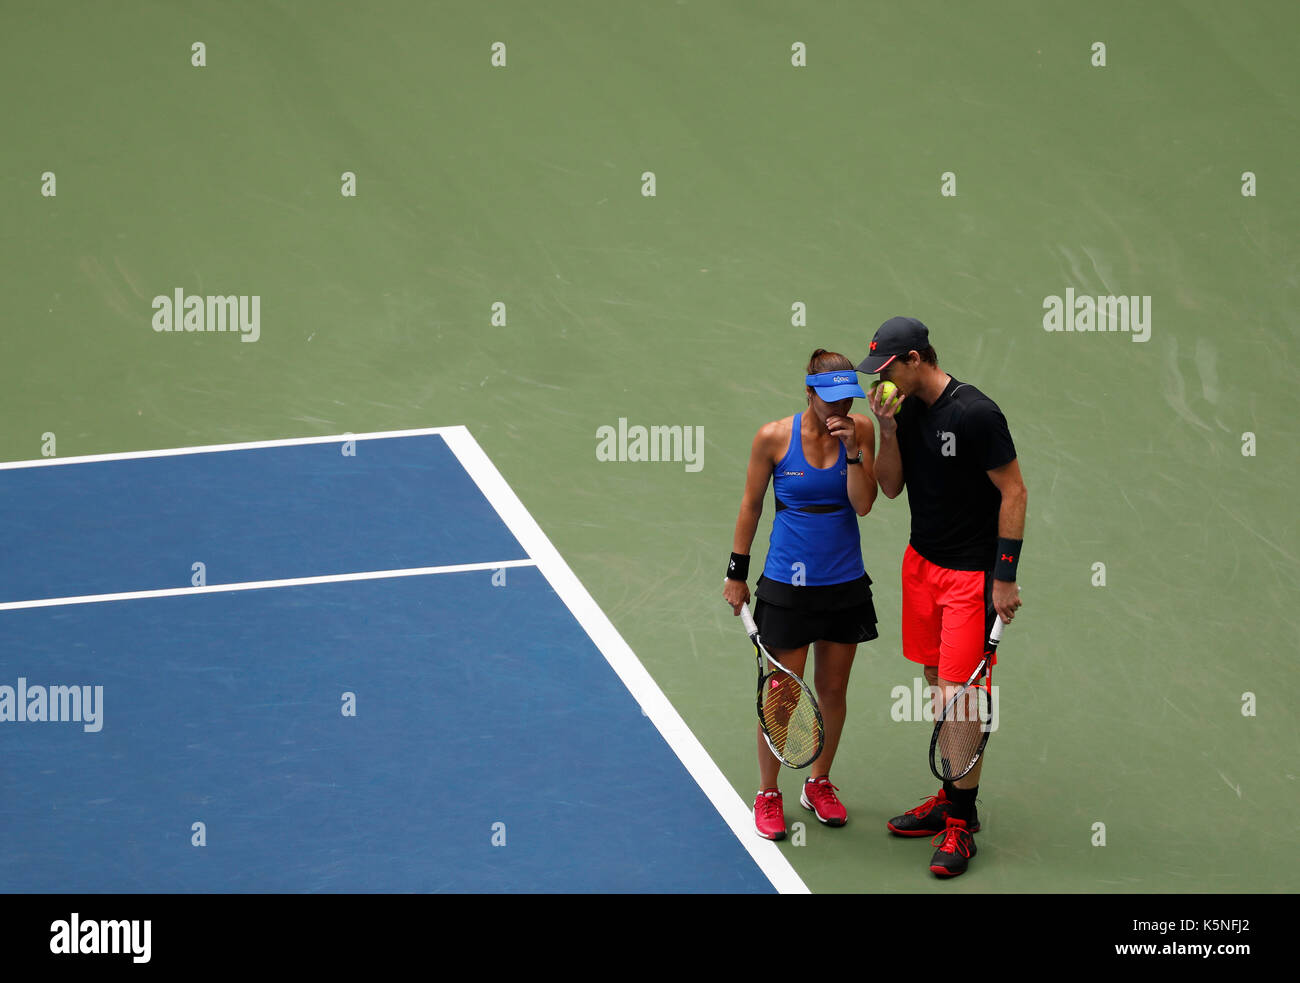 New York, USA. 9th Sep, 2017. Martina Hingis (L) of Switzerland talks to Jamie Murray of Great Britain during the mixed doubles final match against Hao-Ching Chan of Chinese Taipei and Michael Venus of New Zealand at the 2017 US Open in New York, the United States, Sept. 9, 2017. Martina Hingis and Jamie Murray won 2-1 to claim the title. Credit: Qin Lang/Xinhua/Alamy Live News Stock Photo